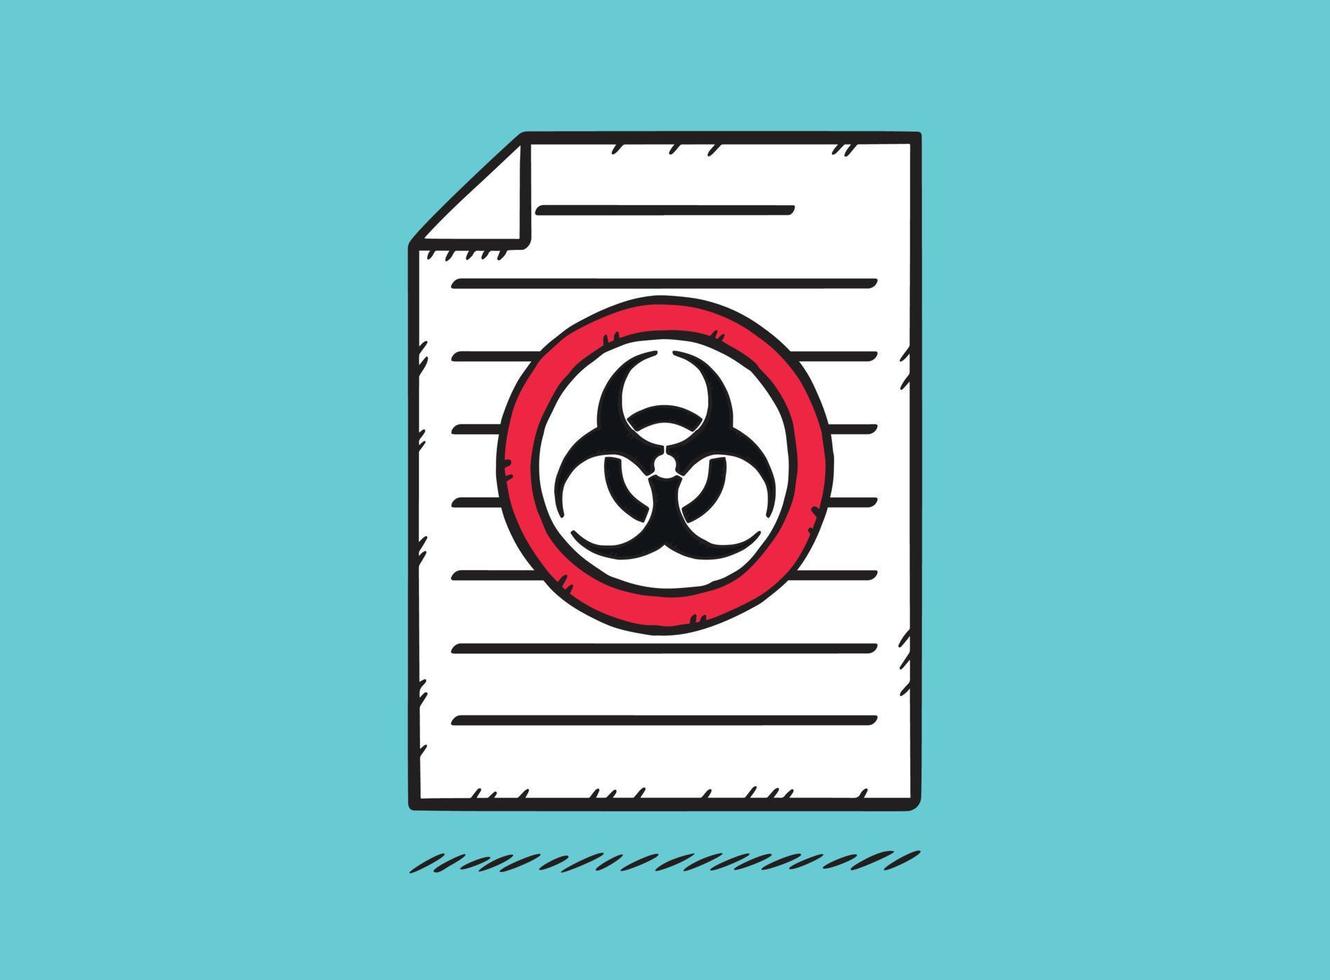 Vector illustration of a document with biohazard sign on it. Hand-drawn vector graphics.